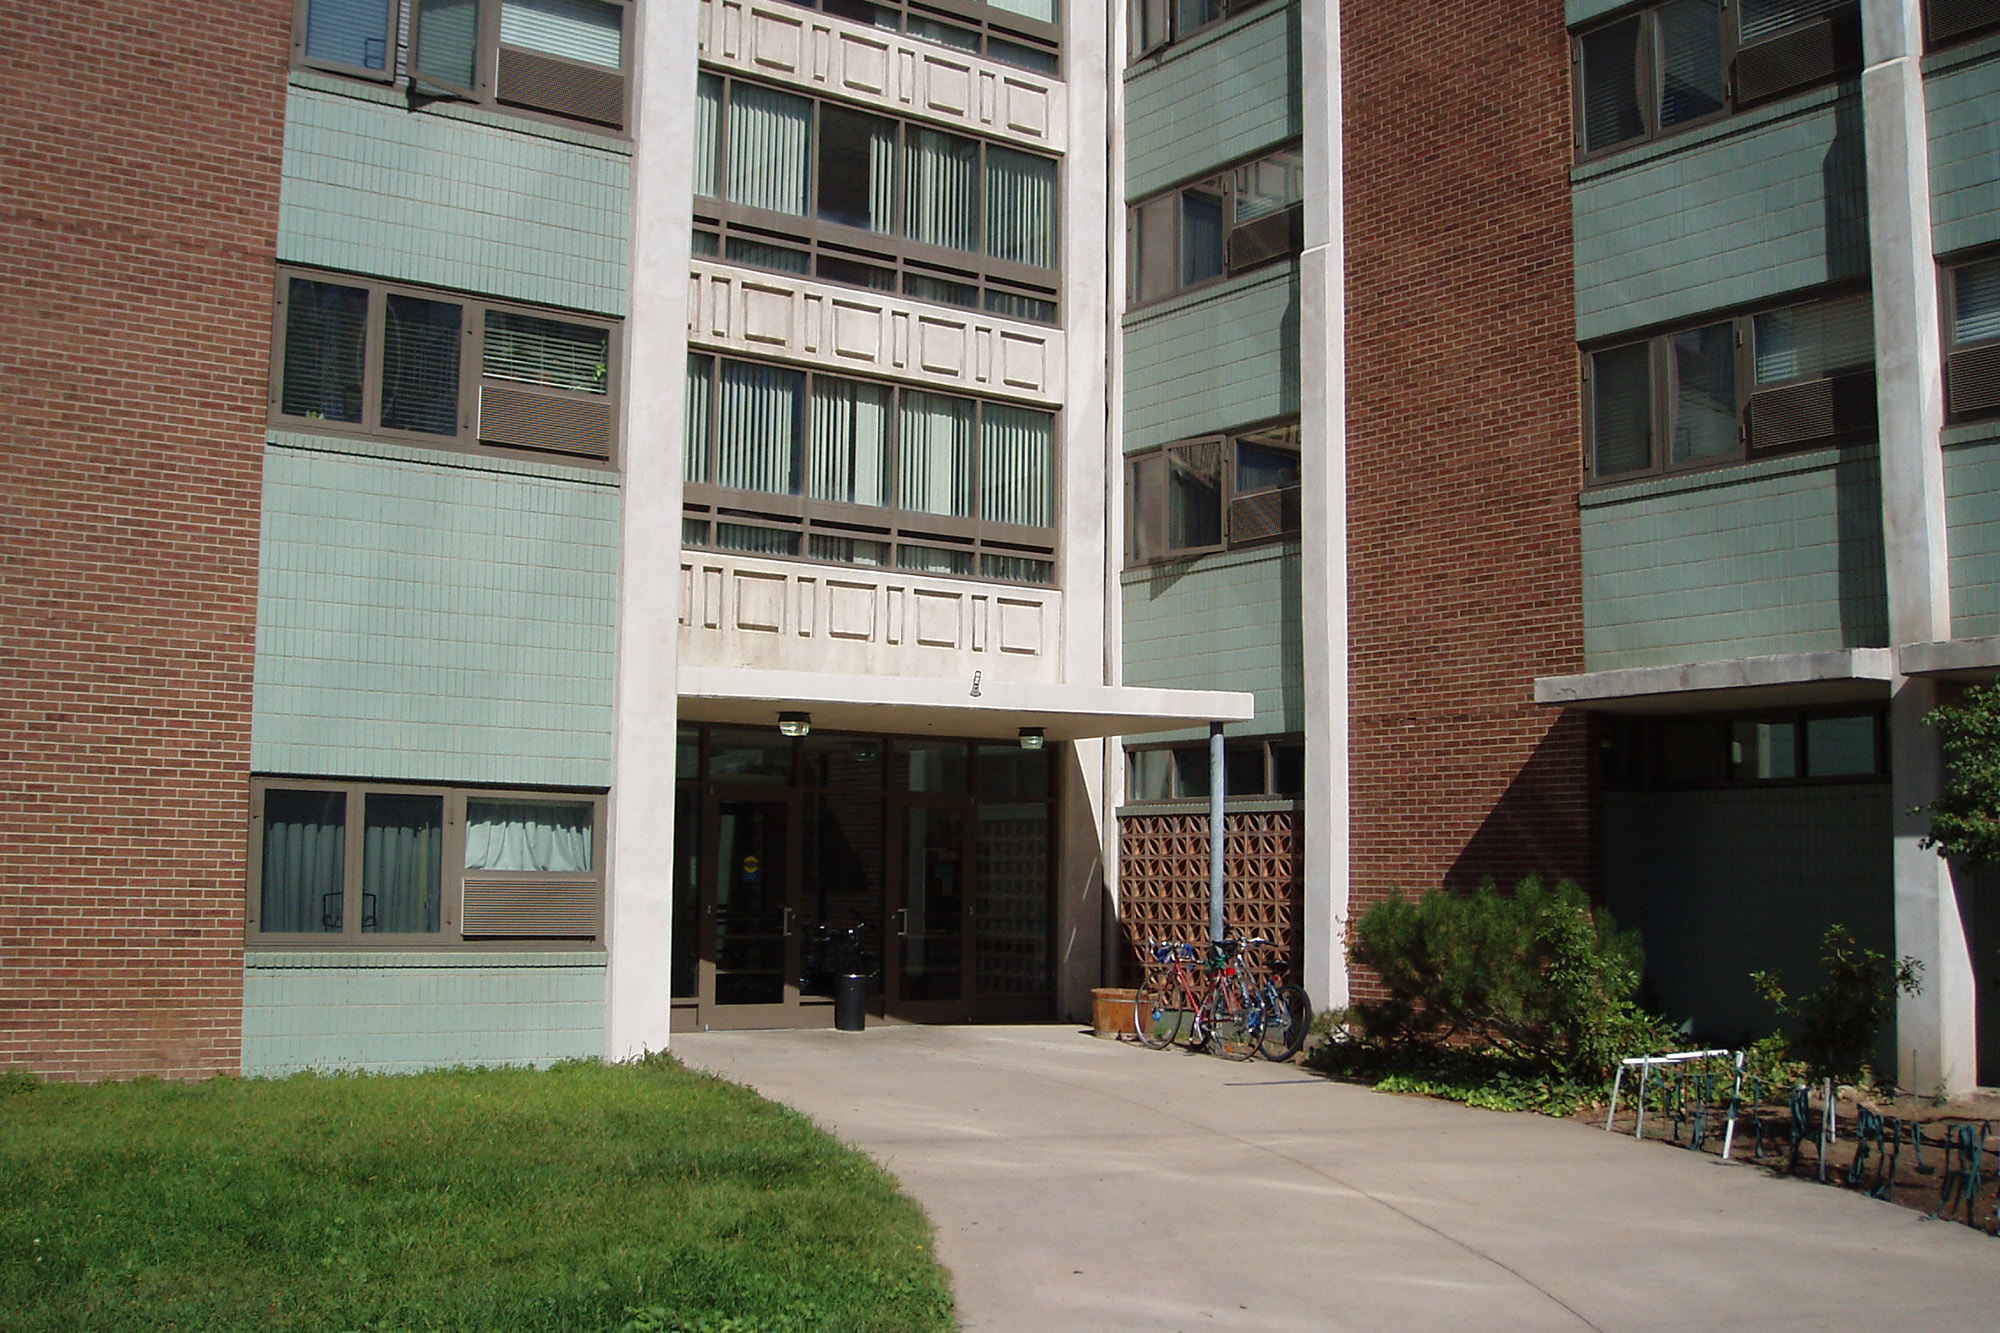 View of front entry of Hirschfield tower before renovation